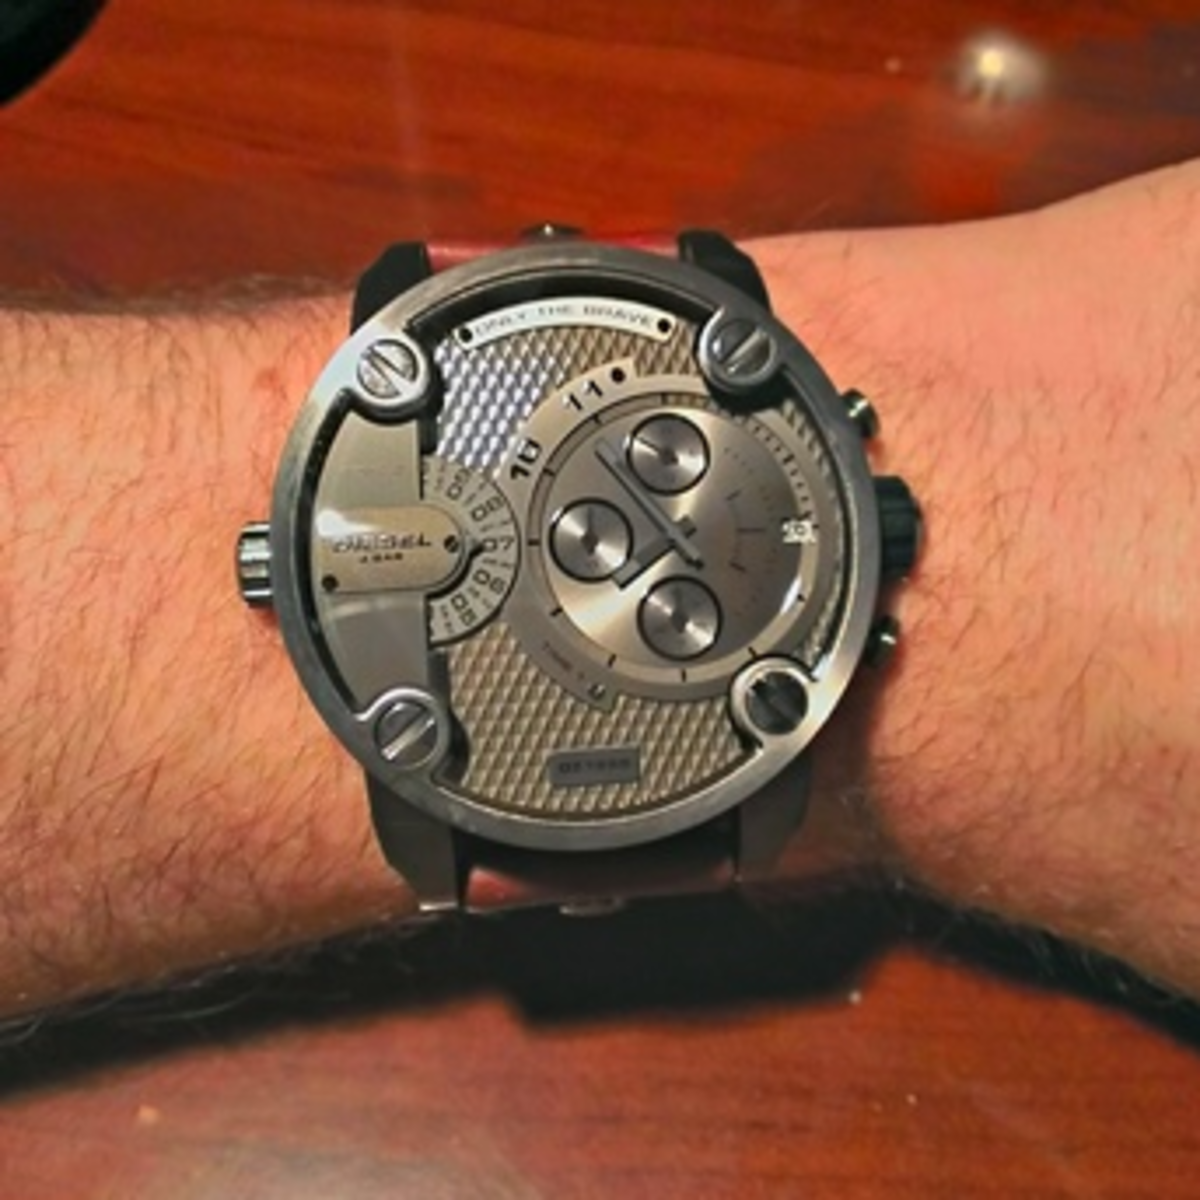 This Diesel SBA Only The Brave watch may be a little eccentric for some, but it's an eye catcher and definitely one of my favorites. At under $200 it's a good deal with it's unique watch face, functions, and calfskin strap. 